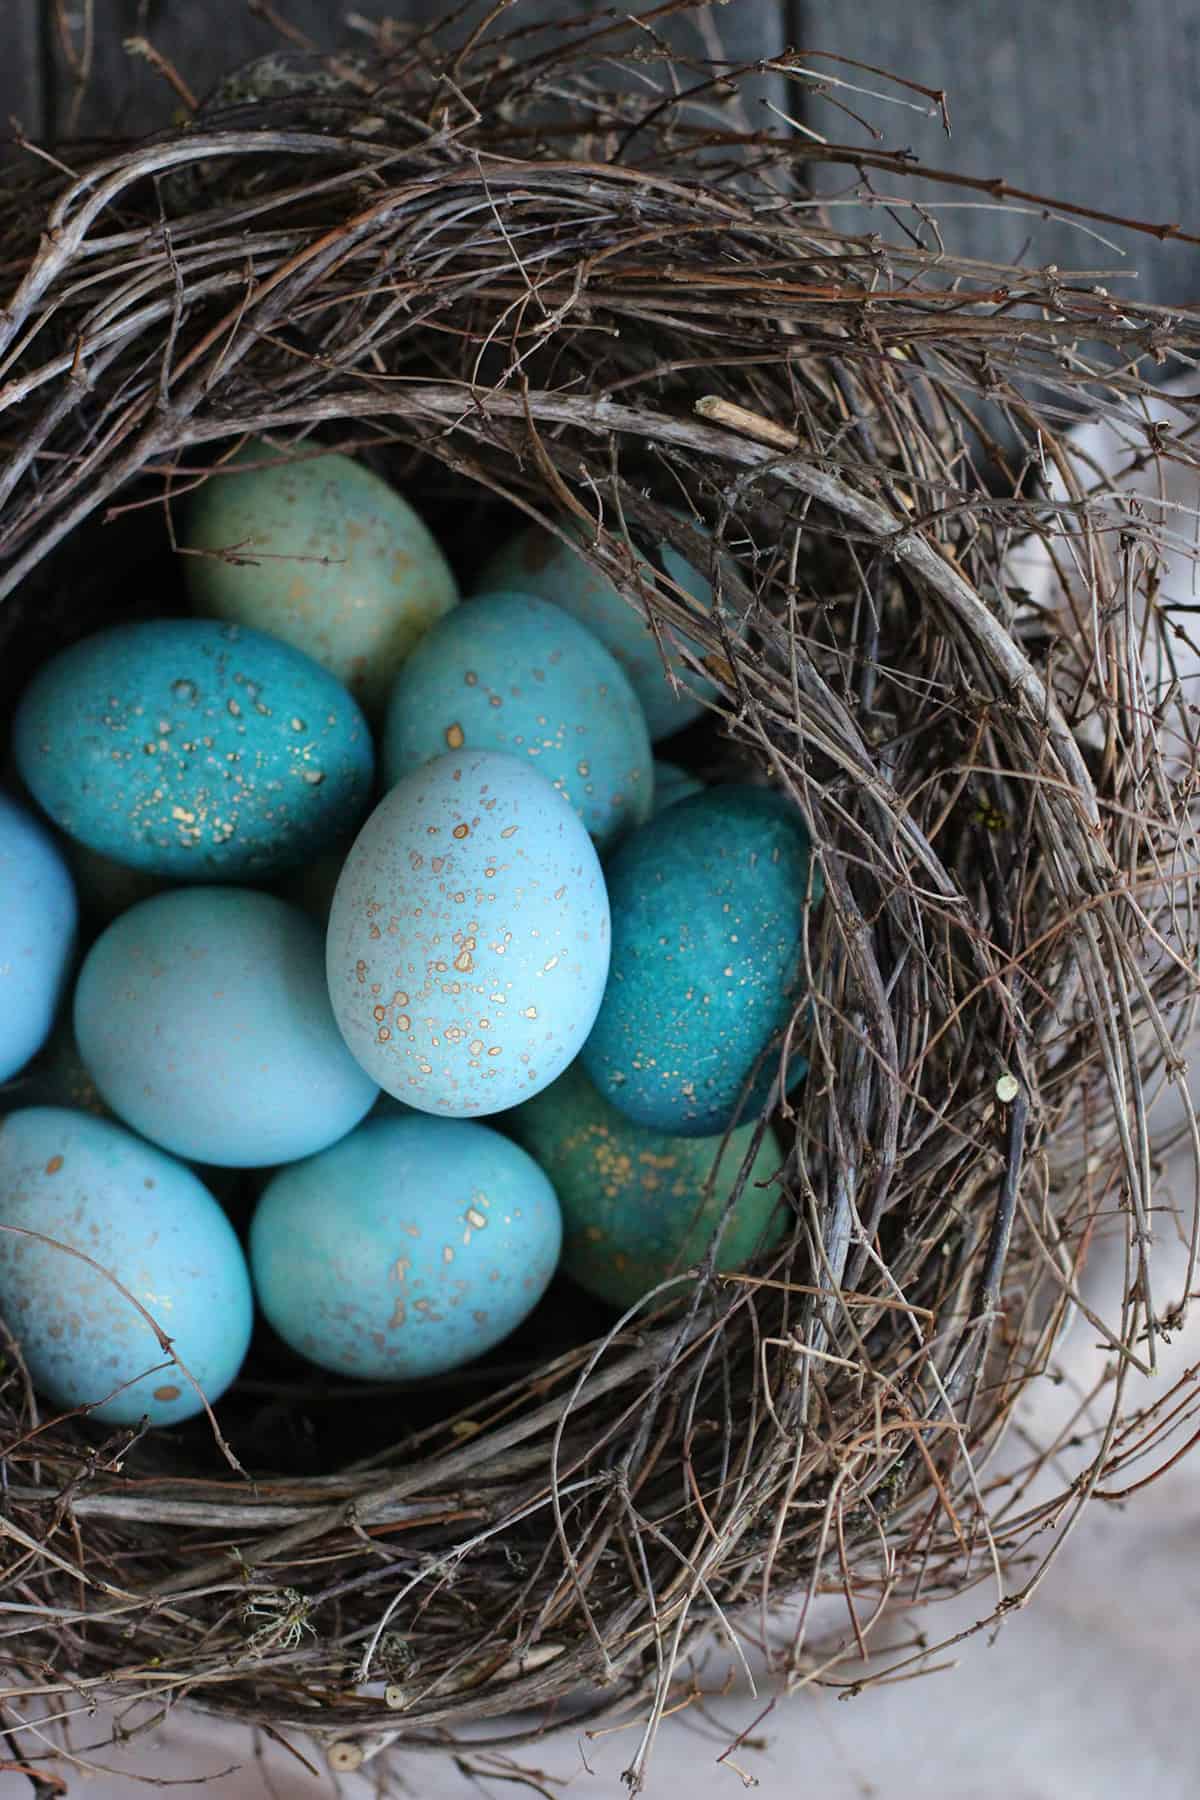 Birds nest filled with robins egg inspired DIY dyed eggs with gold flecks.